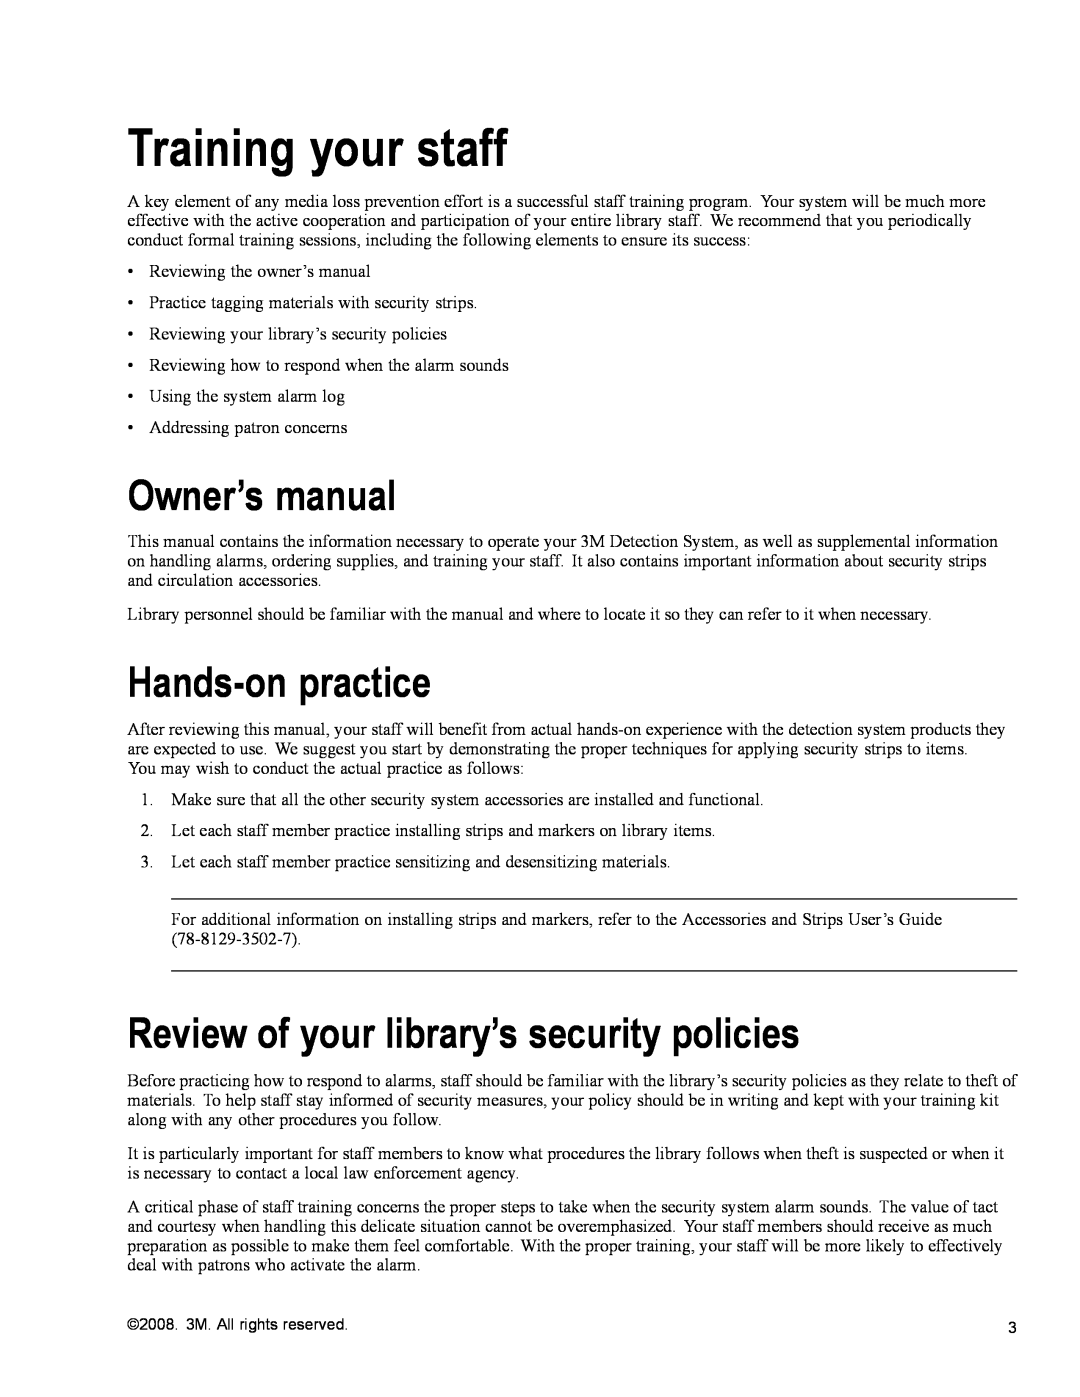 3M 700 Series Training your staff, Owner’s manual, Hands-onpractice, Review of your library’s security policies 